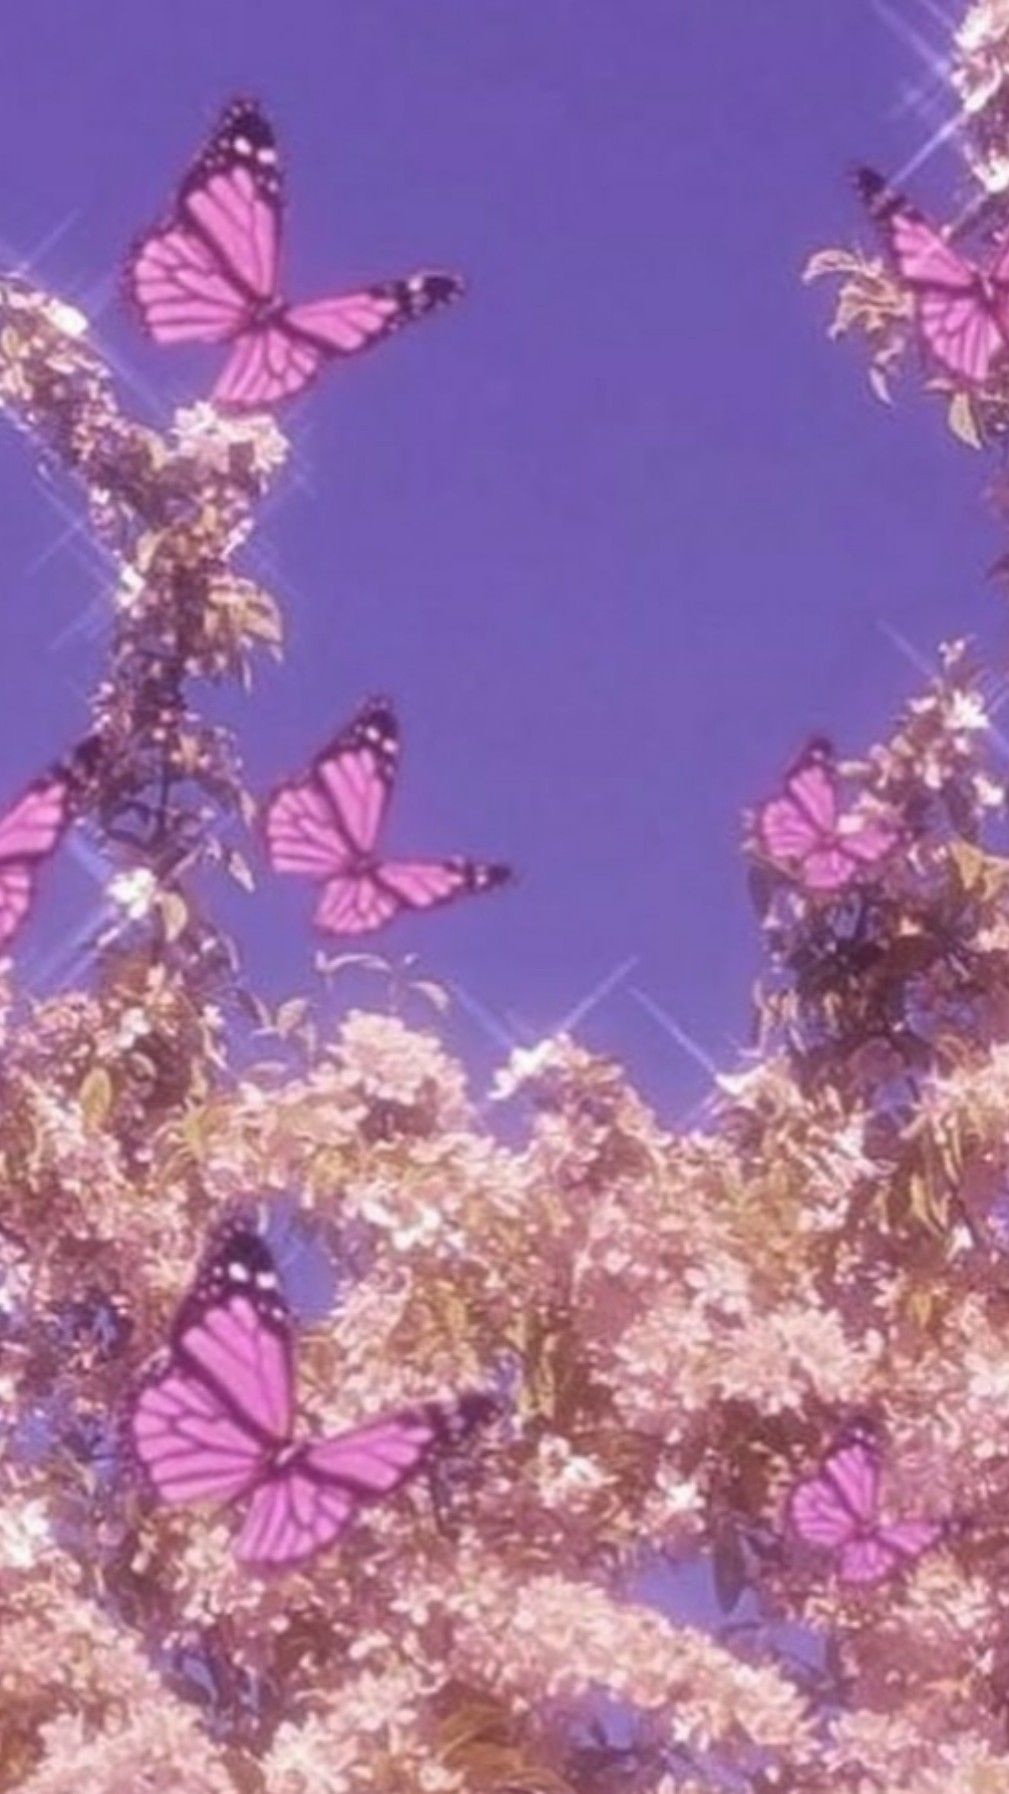 Aesthetic wallpaper with butterflies, flowers and a blue sky - Y2K